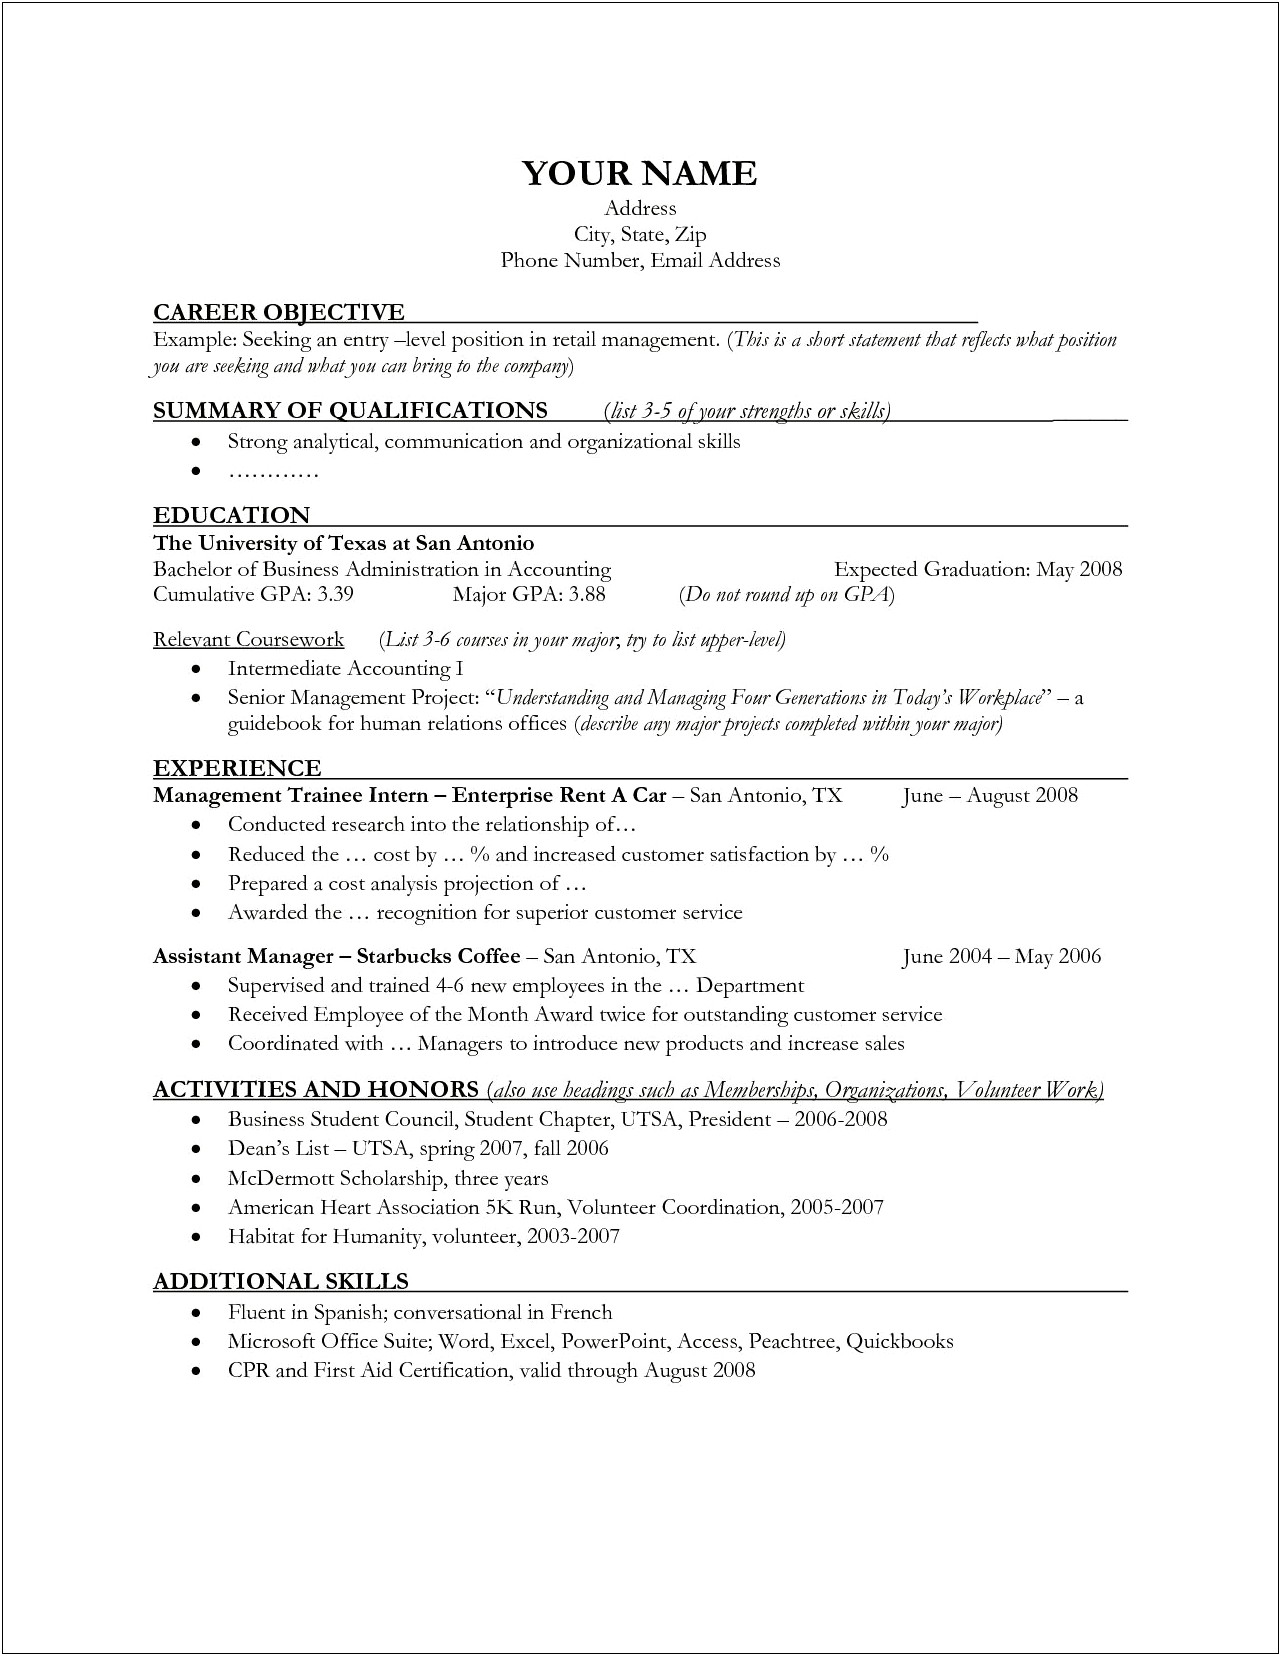 Resume For First Sales Management Position